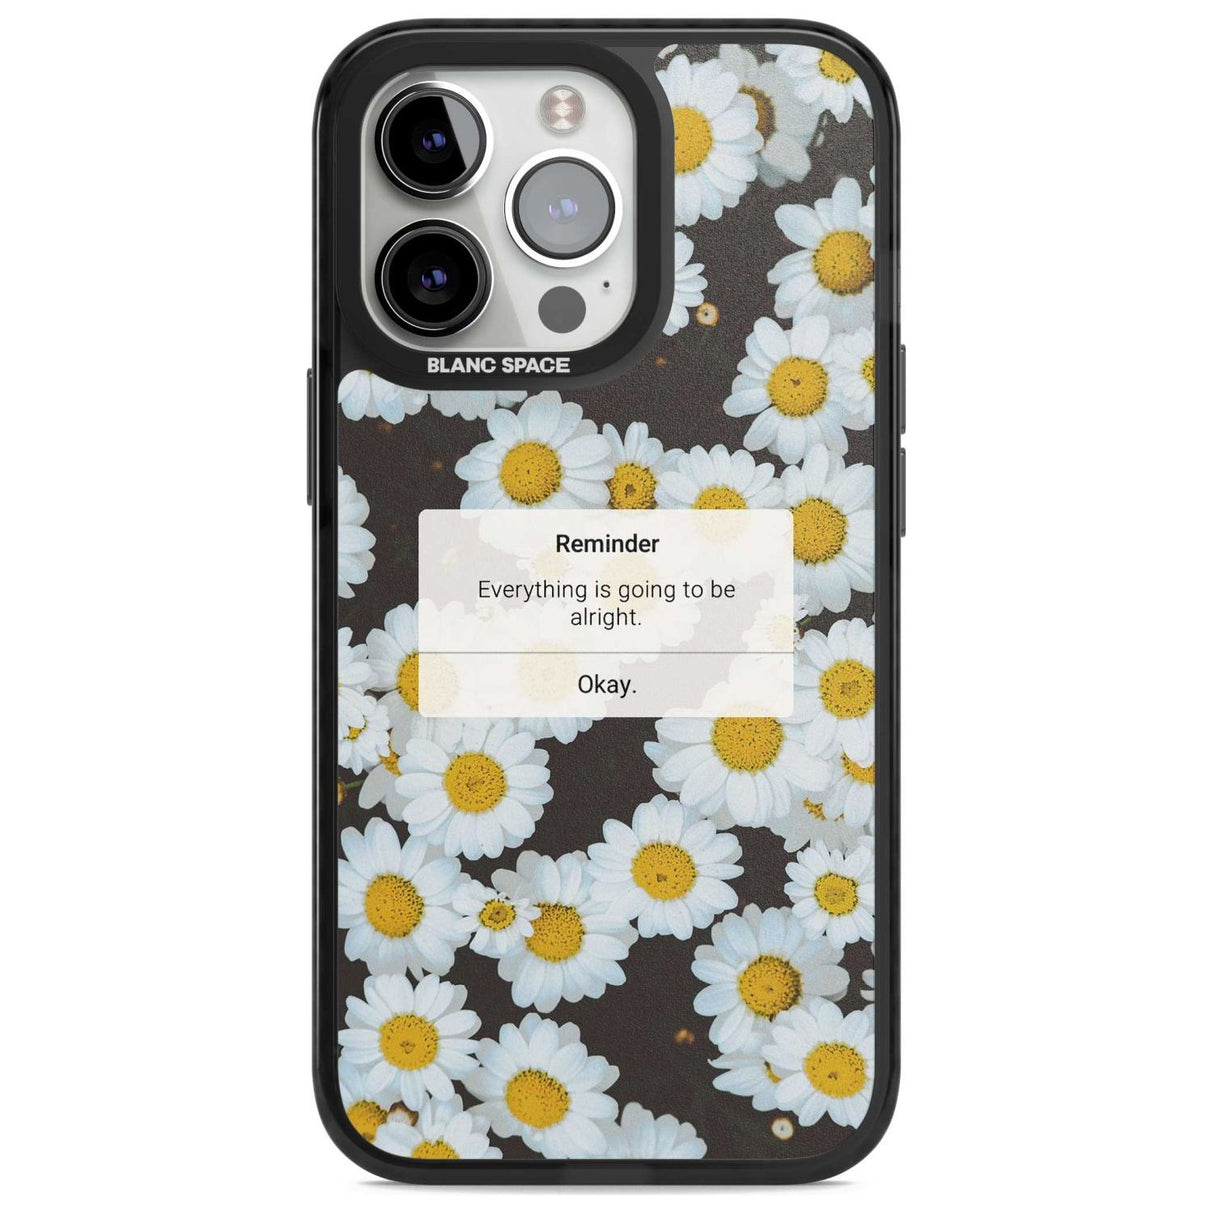 "Everything will be alright" iPhone Reminder Phone Case iPhone 15 Pro Max / Magsafe Black Impact Case,iPhone 15 Pro / Magsafe Black Impact Case,iPhone 14 Pro Max / Magsafe Black Impact Case,iPhone 14 Pro / Magsafe Black Impact Case,iPhone 13 Pro / Magsafe Black Impact Case Blanc Space